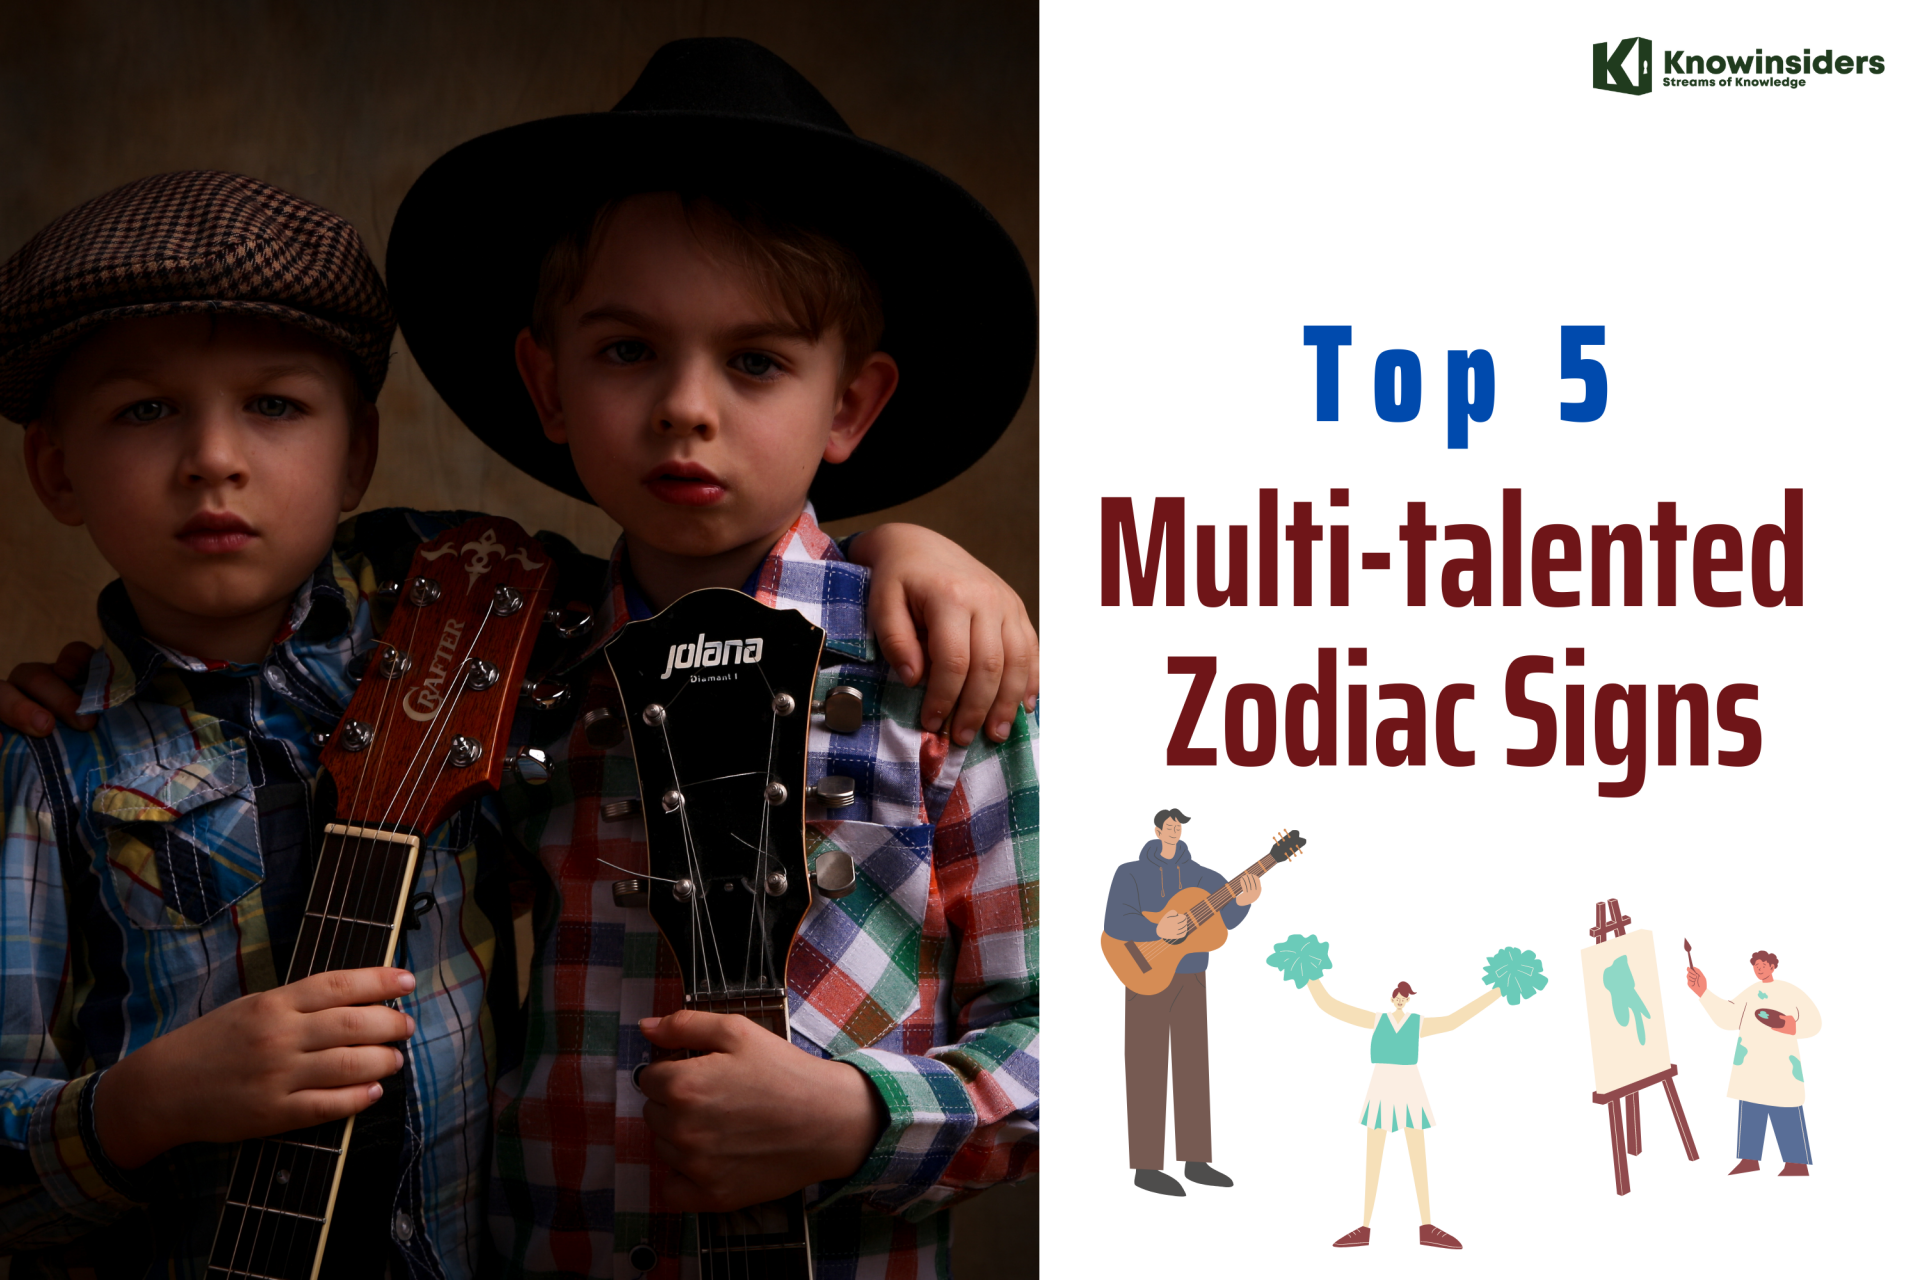 Top 5 Zodiac Signs Who Are Multi-Talented - According to Astrologers